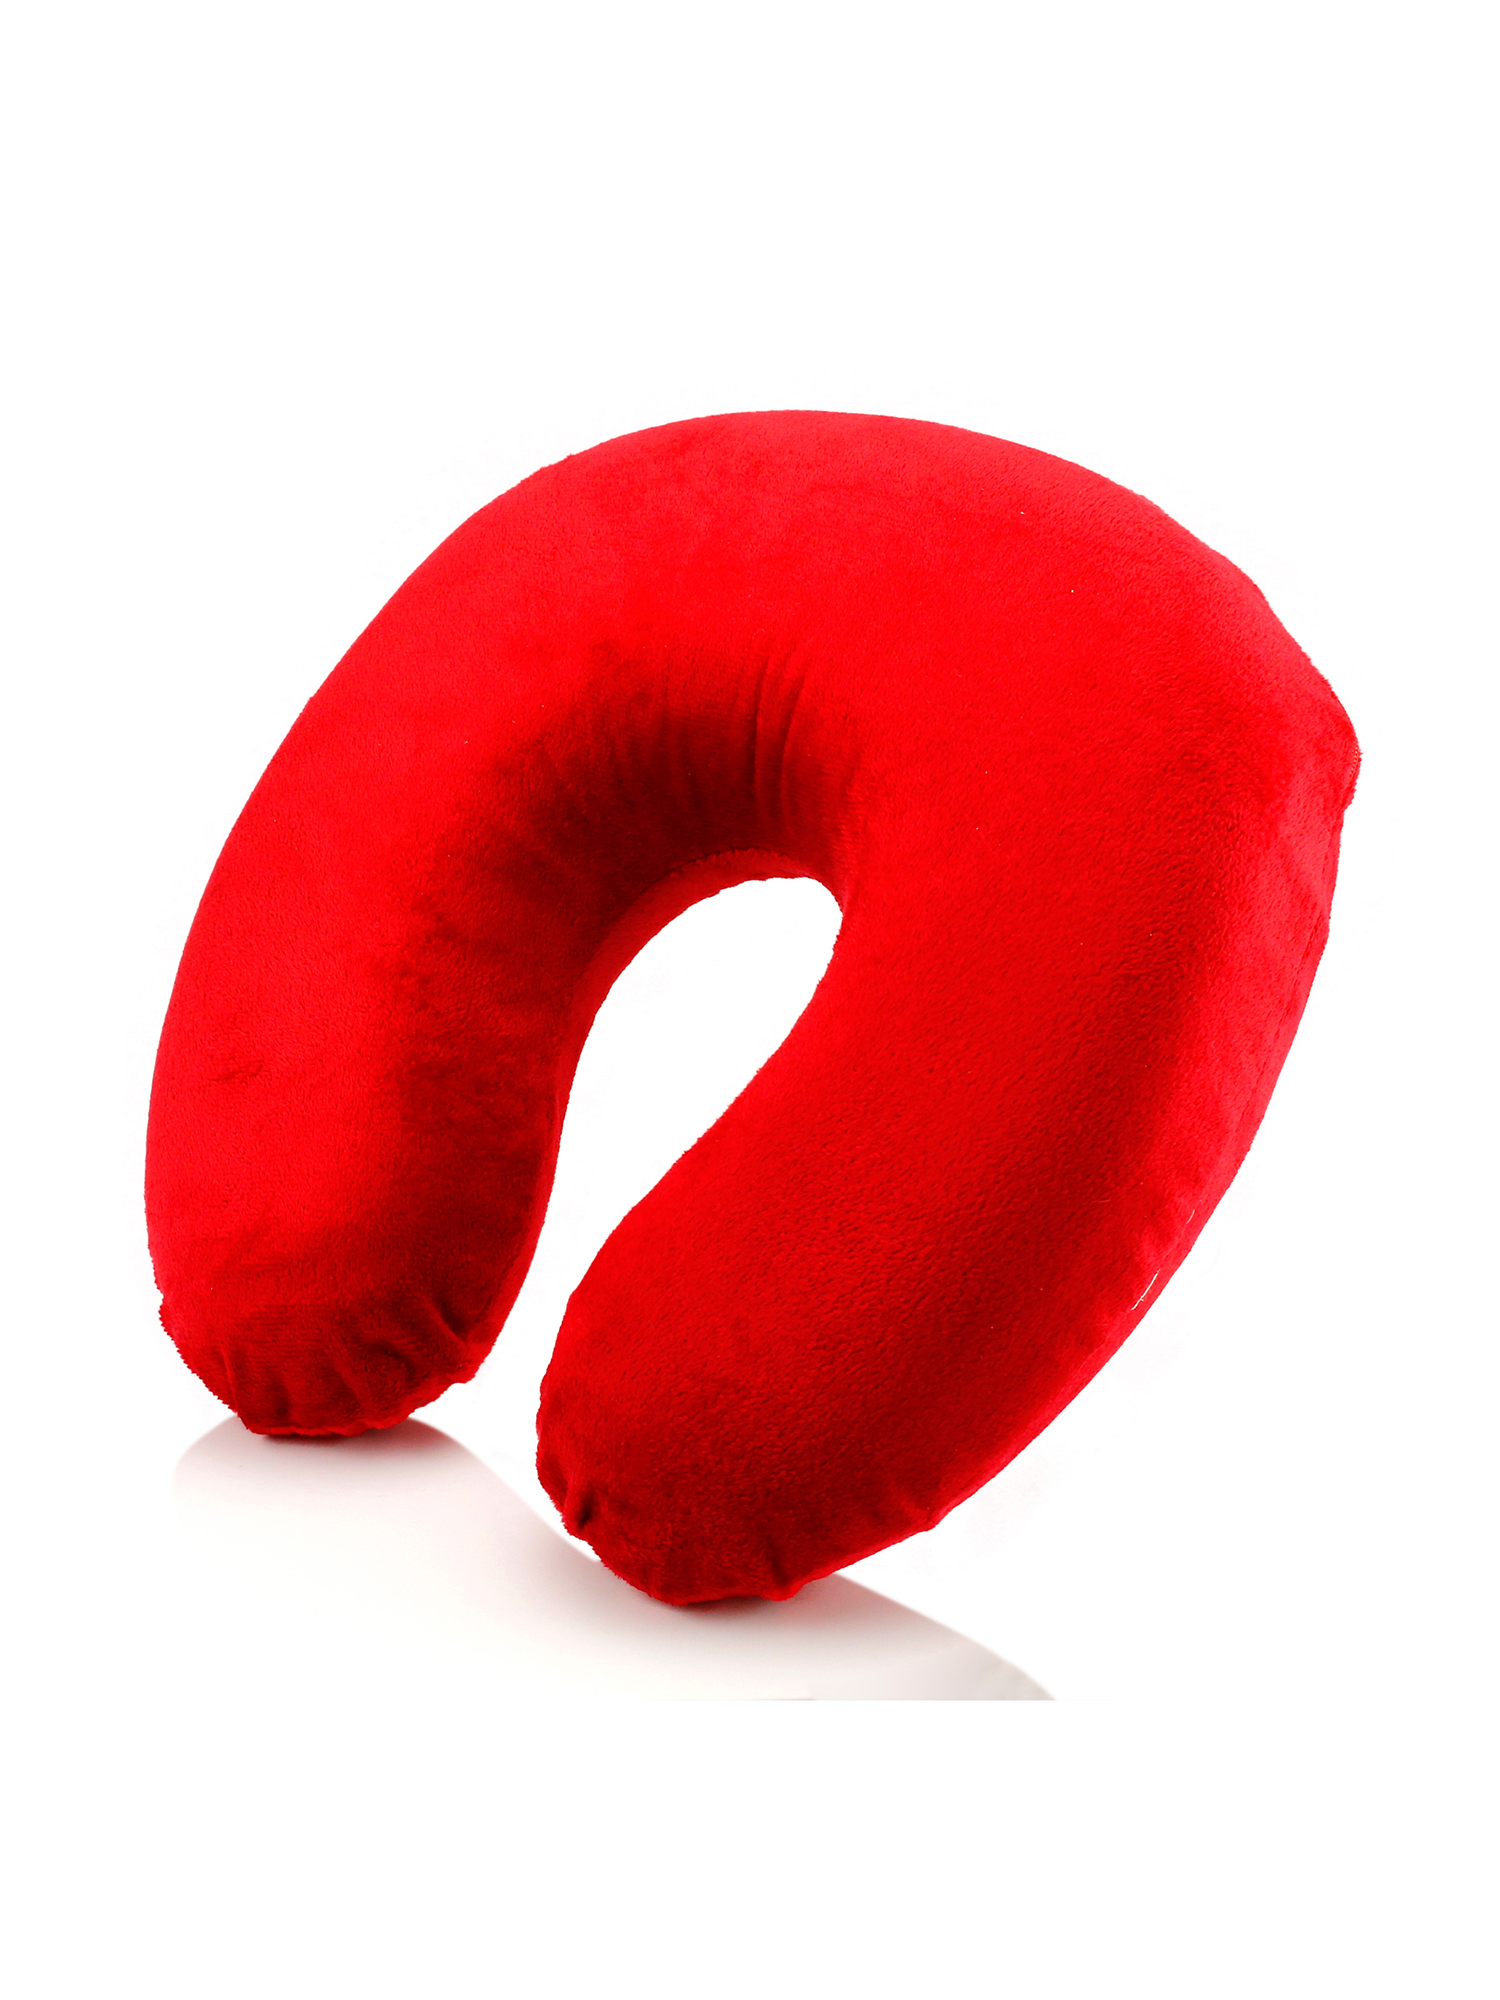 Travel Pillow Memory Foam Neck Cushion Support Rest Outdoors Car Flight - image 1 of 5